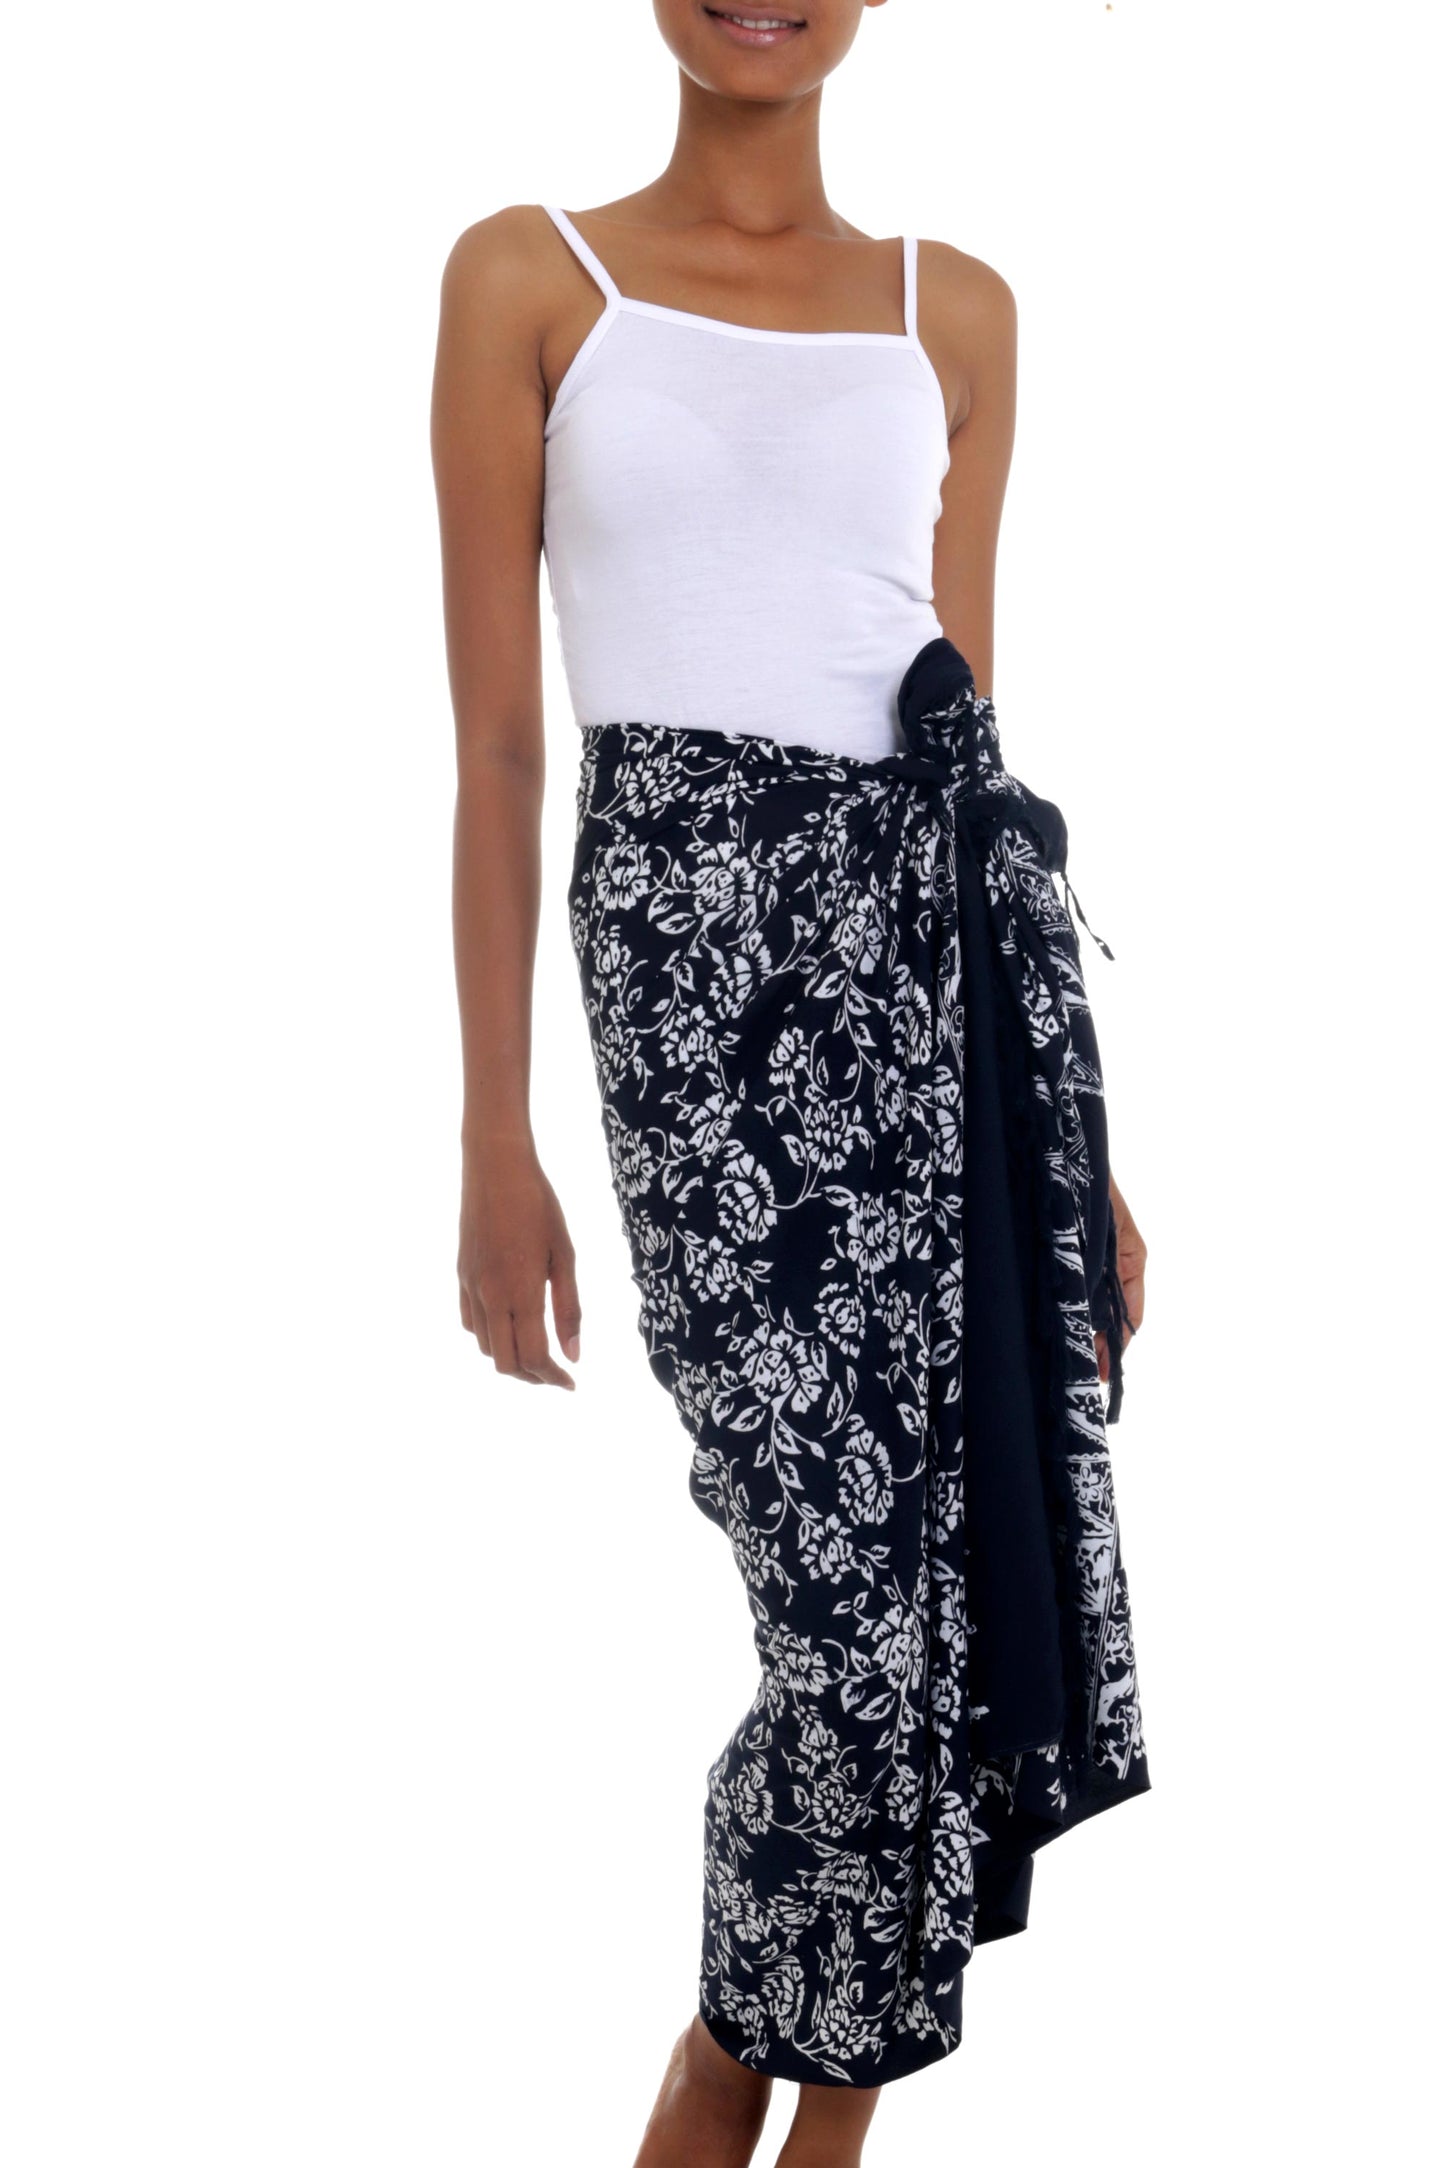 Tropical Garden in Black Black and White Rayon Sarong with Floral Batik Motifs